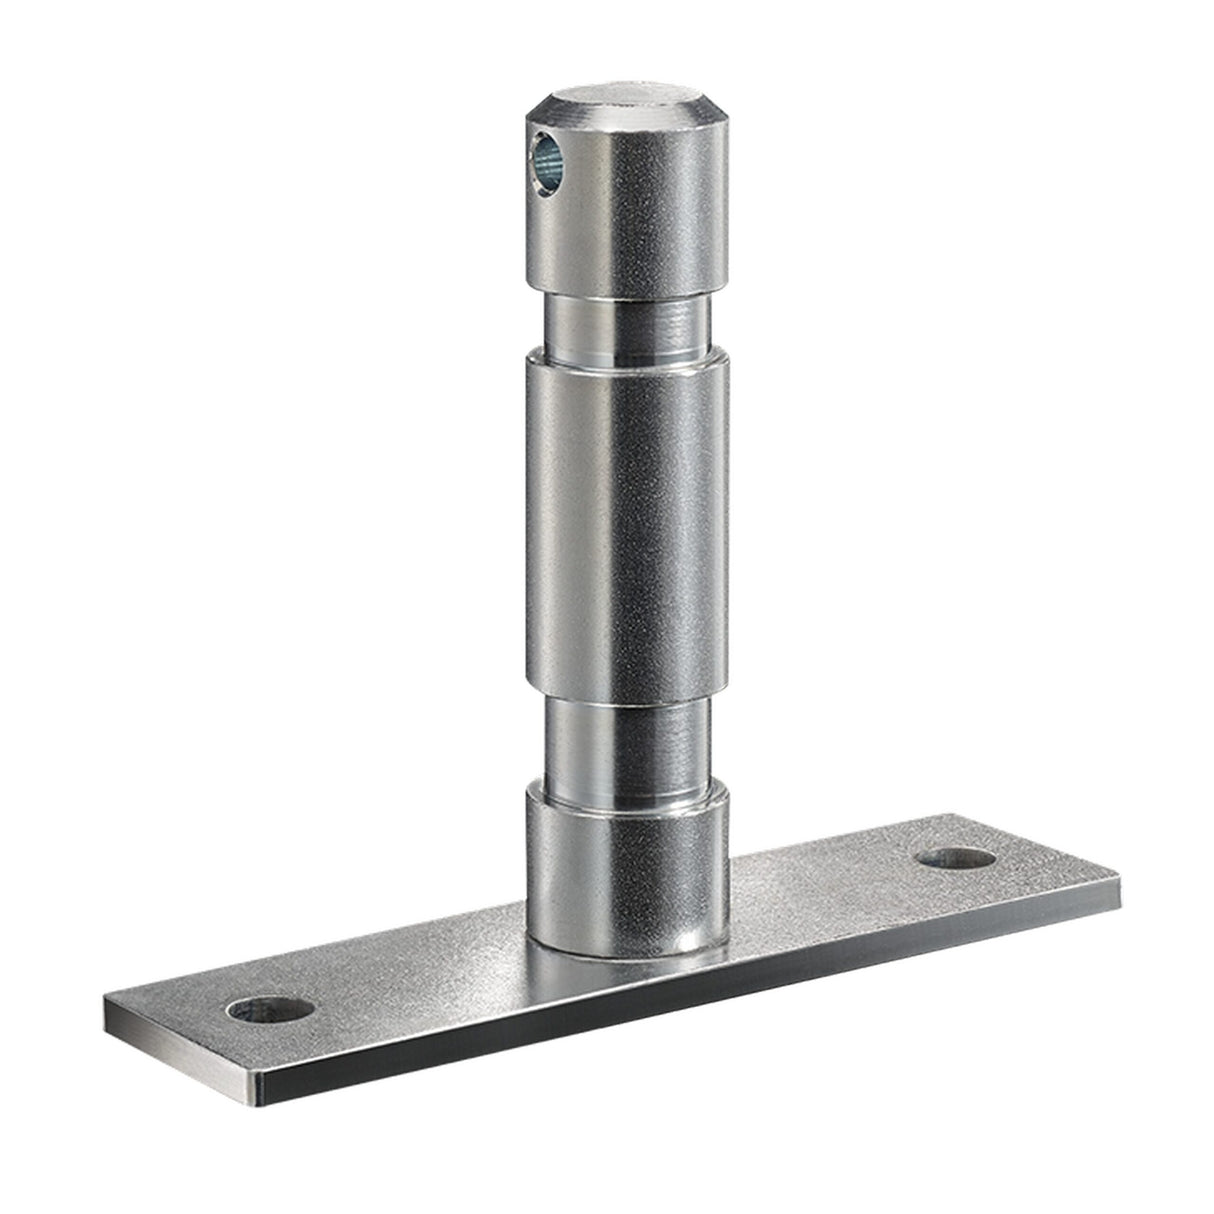 Neumann LH 29 TV-Spigot for Lighting Stands or G-Clamps and Truss Bars, Metal Finish